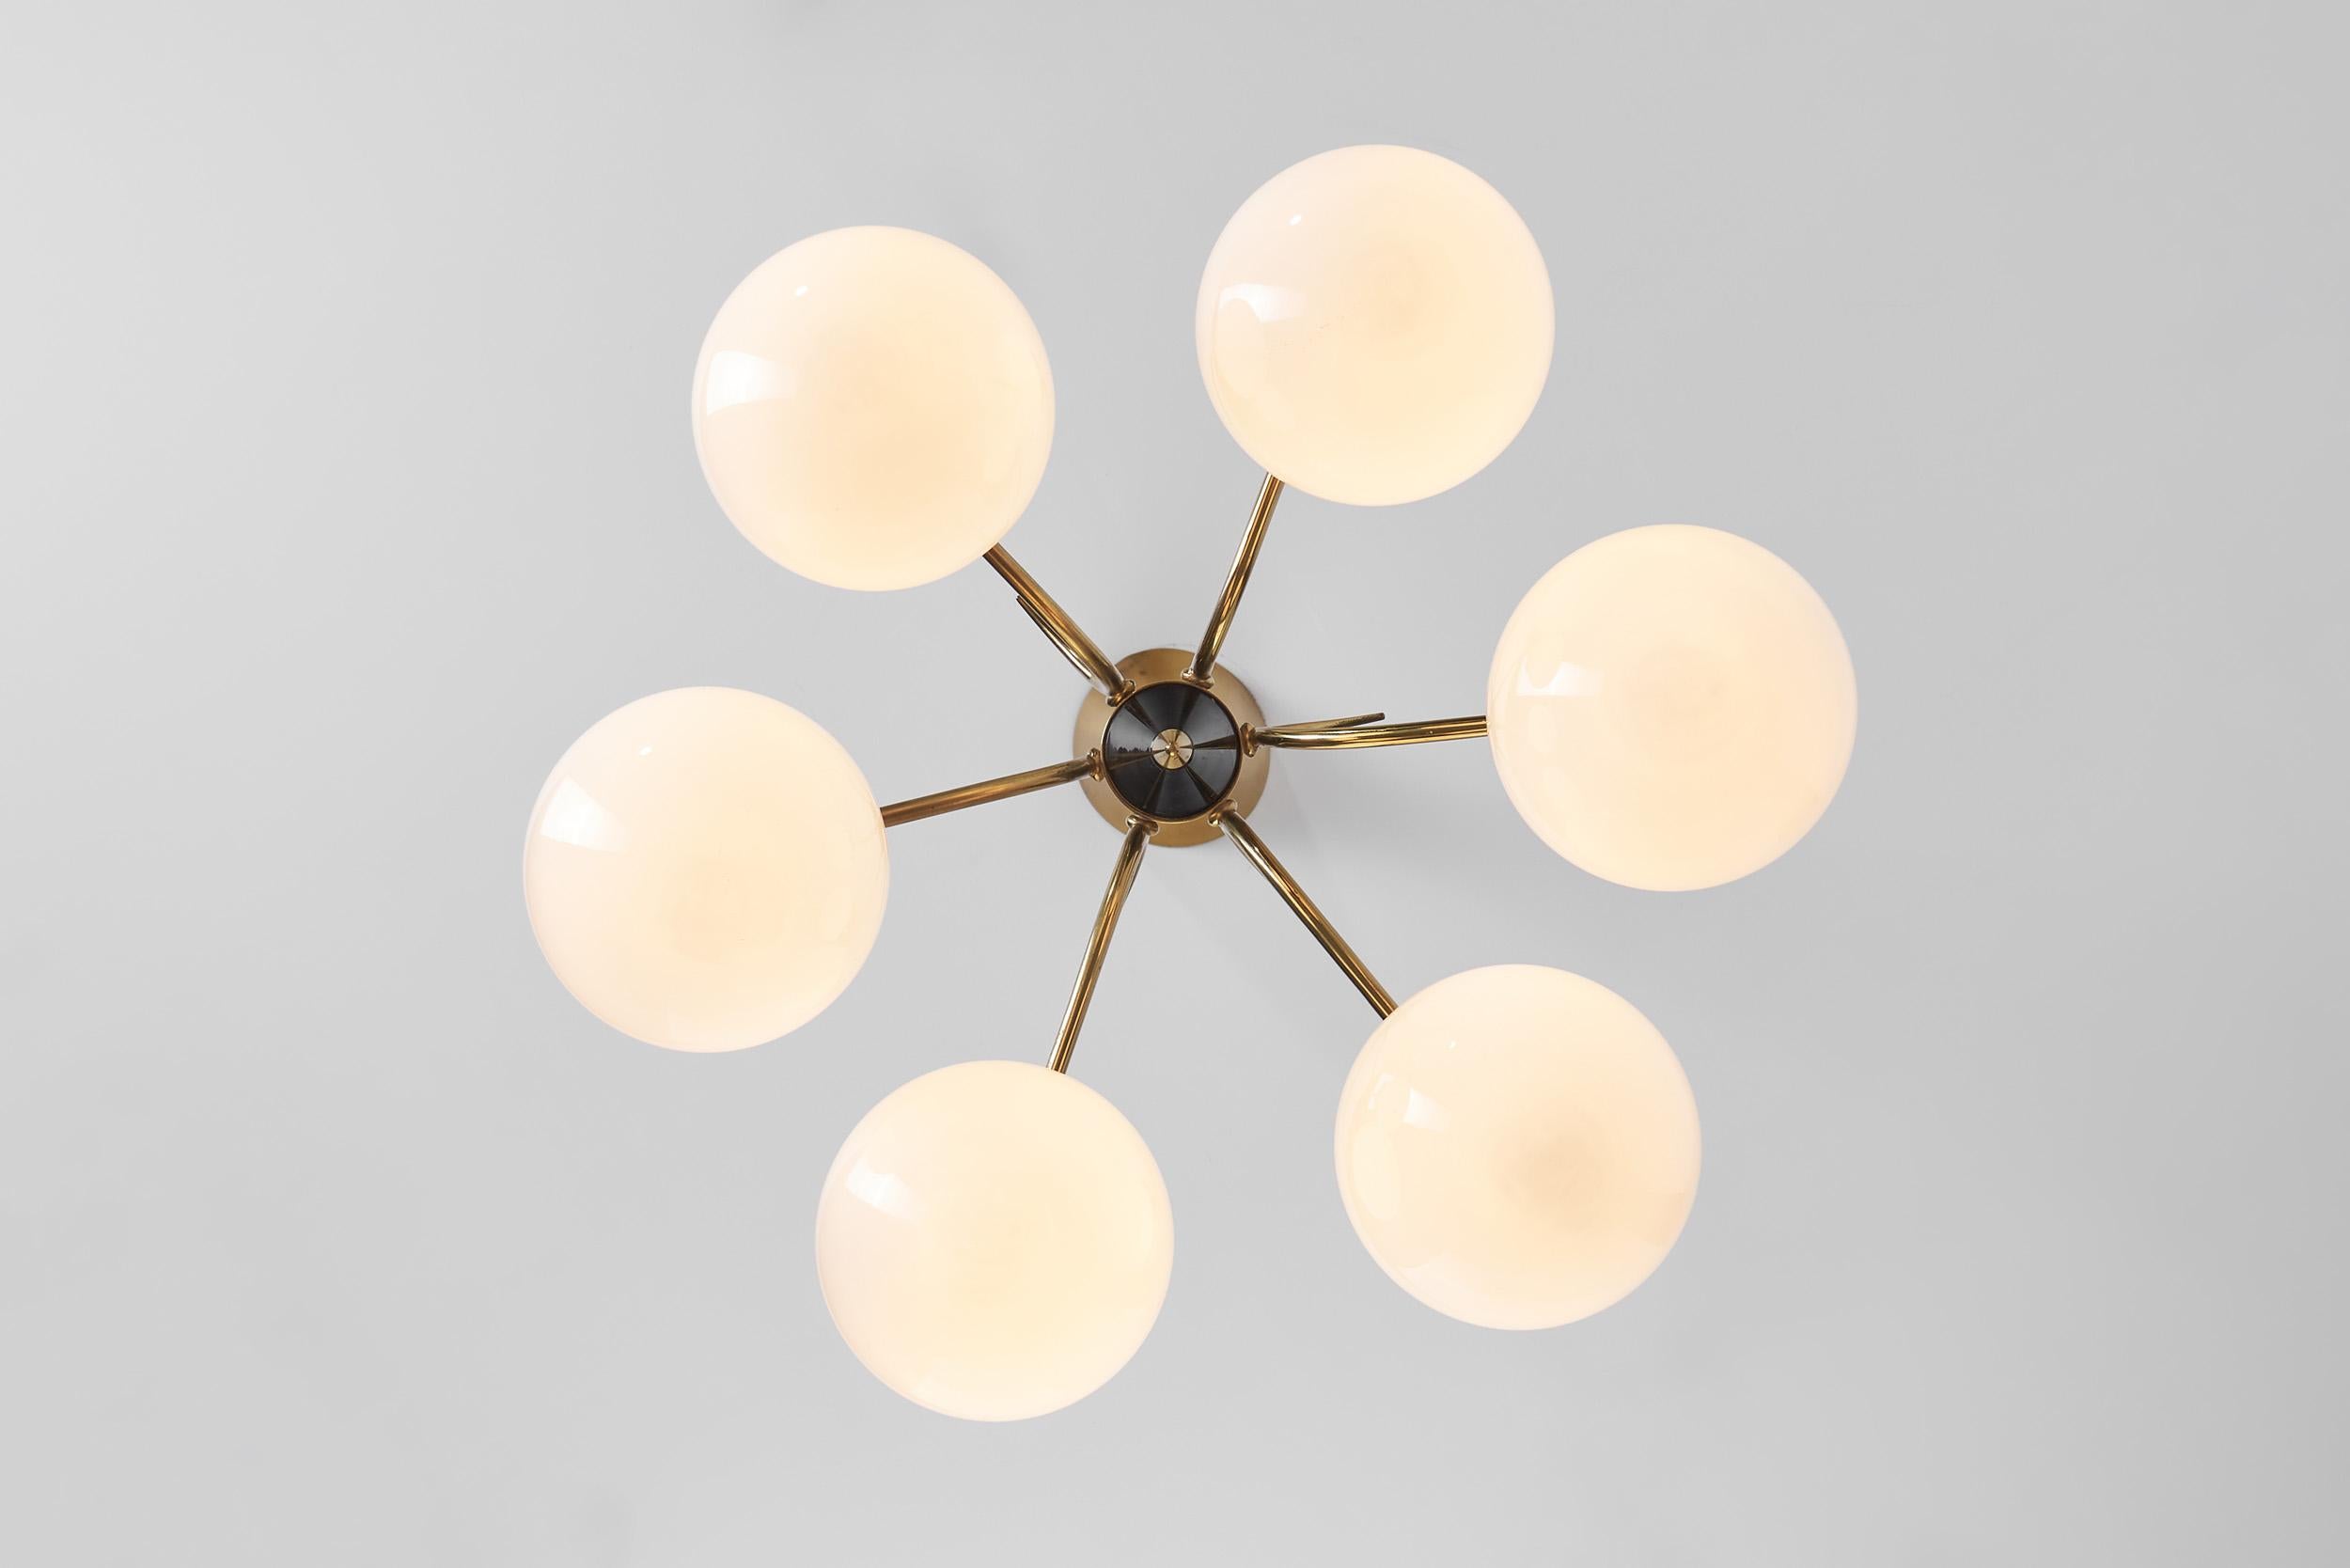 Mid-20th Century Sculptural Brass and Glass Ceiling Light, Scandinavia, 1950s For Sale